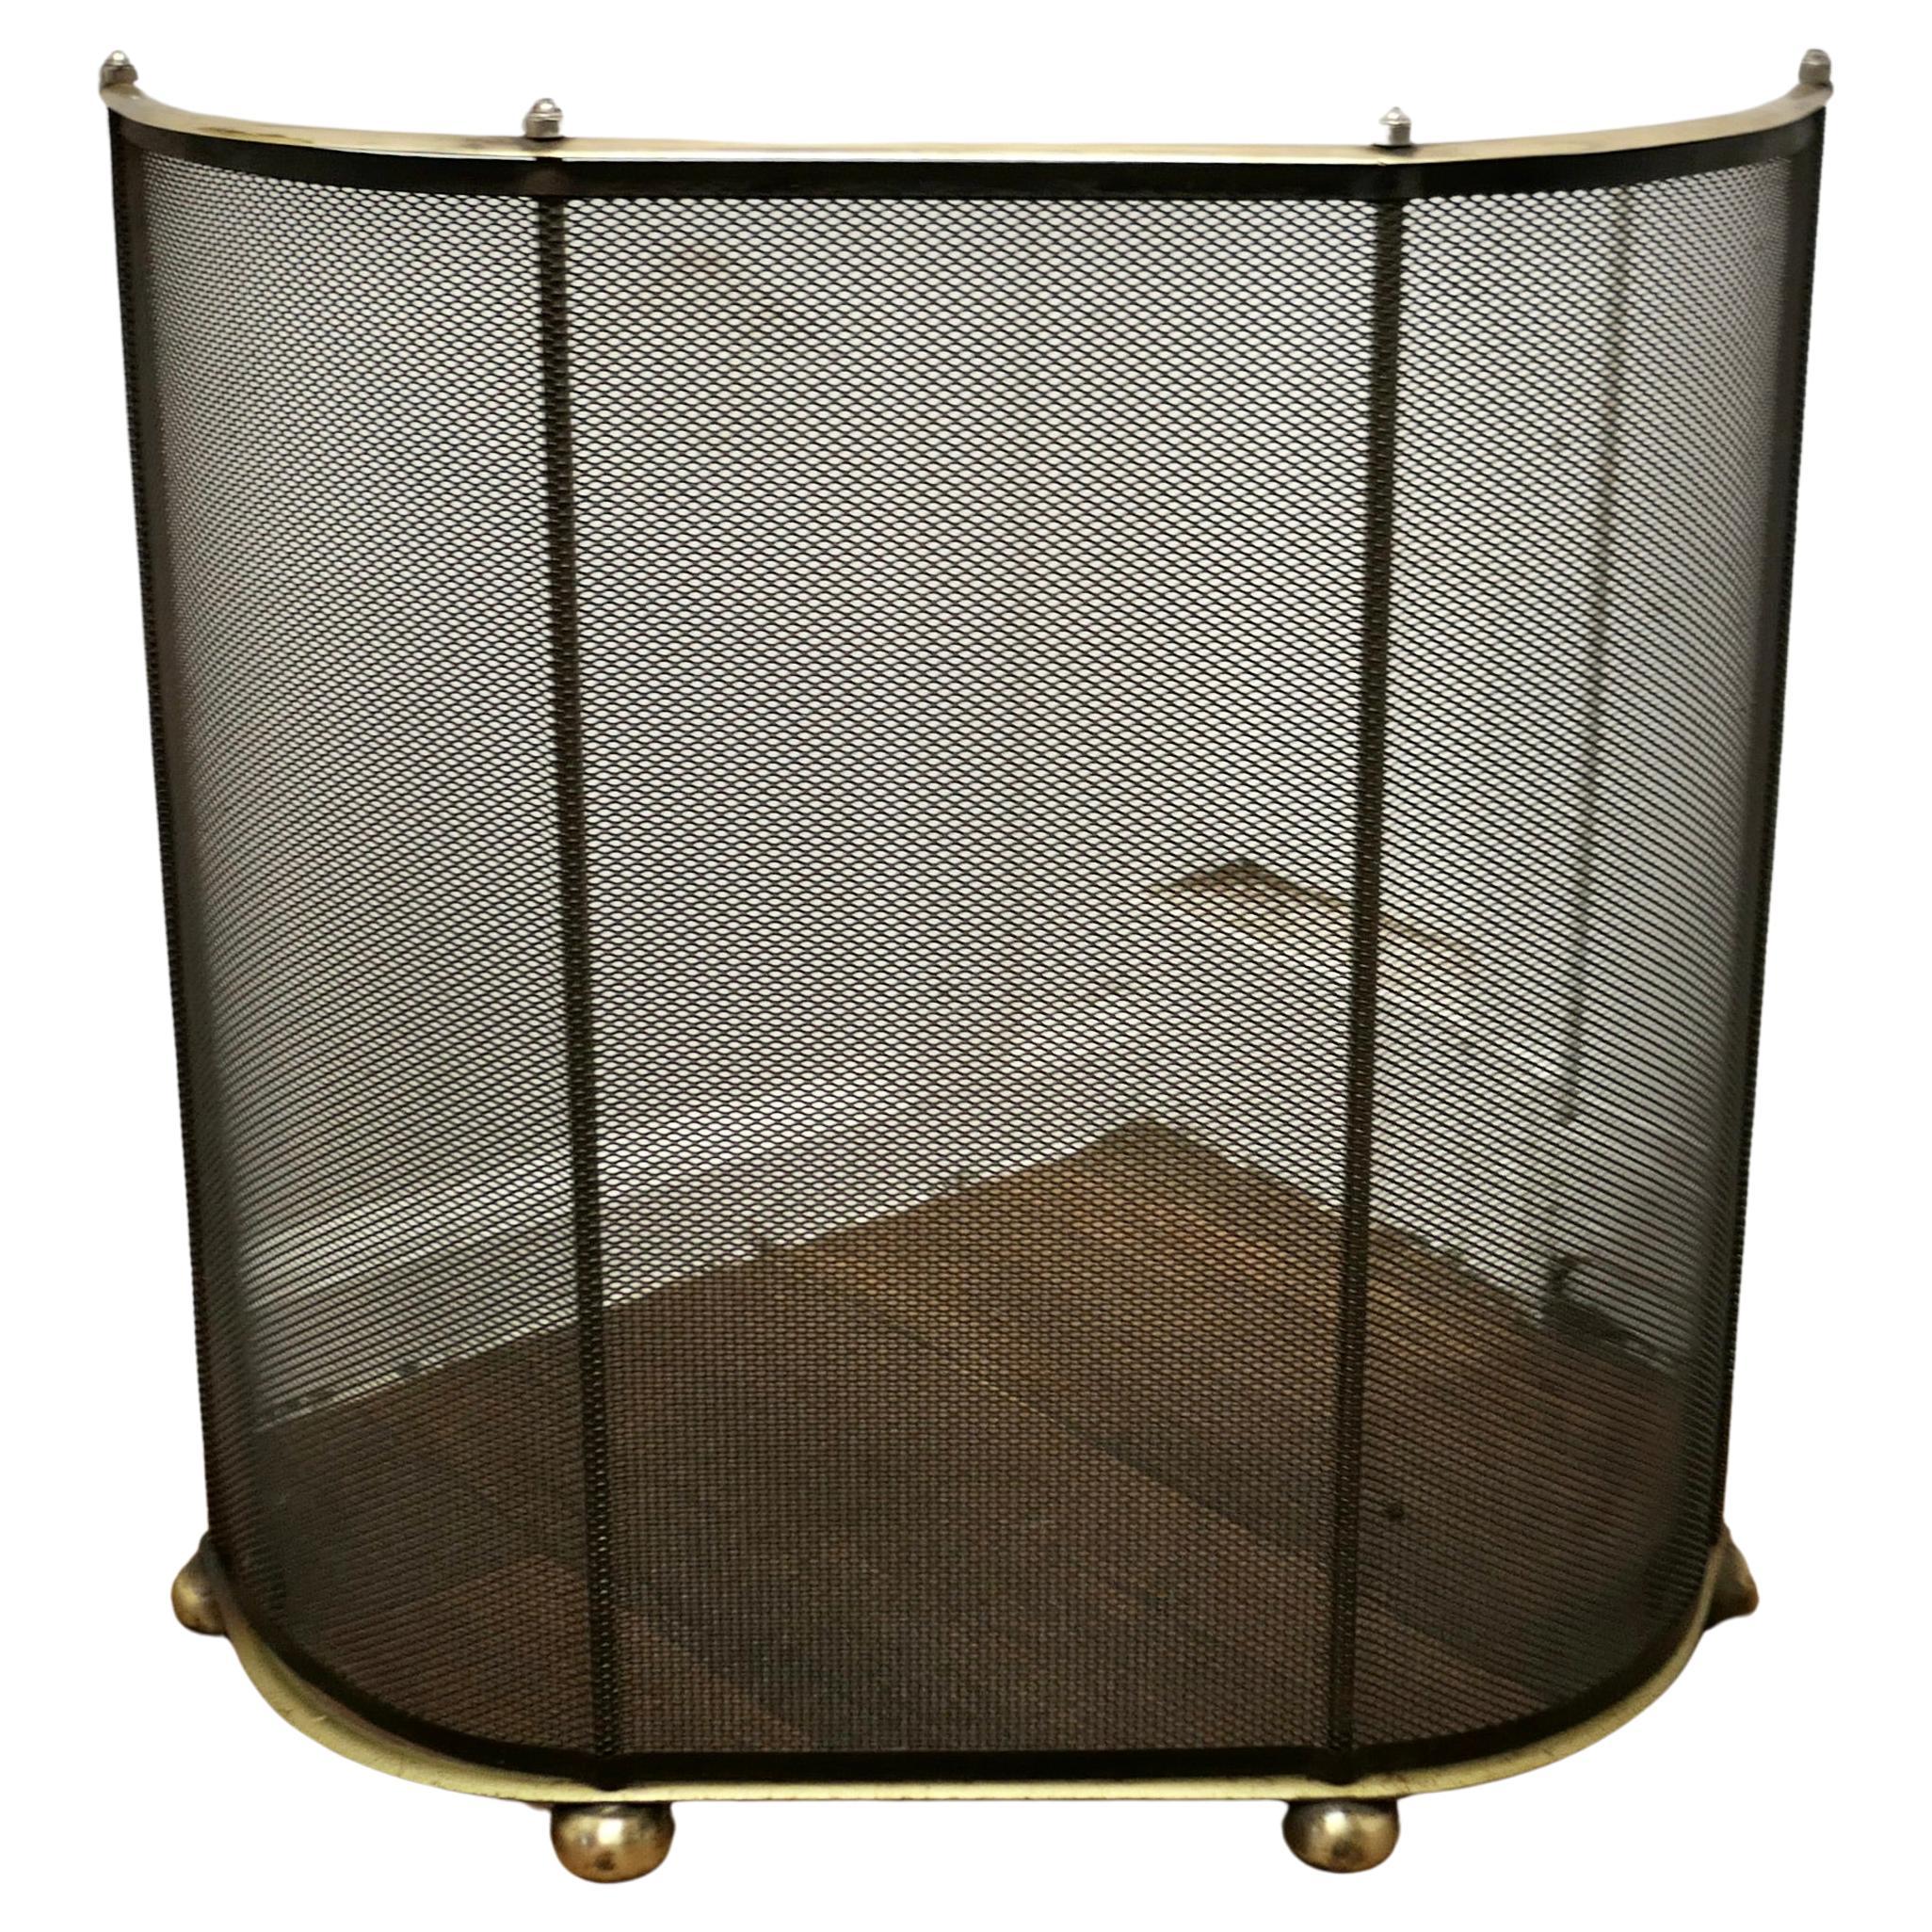  Curved Brass and Iron Nursery Fire Guard   